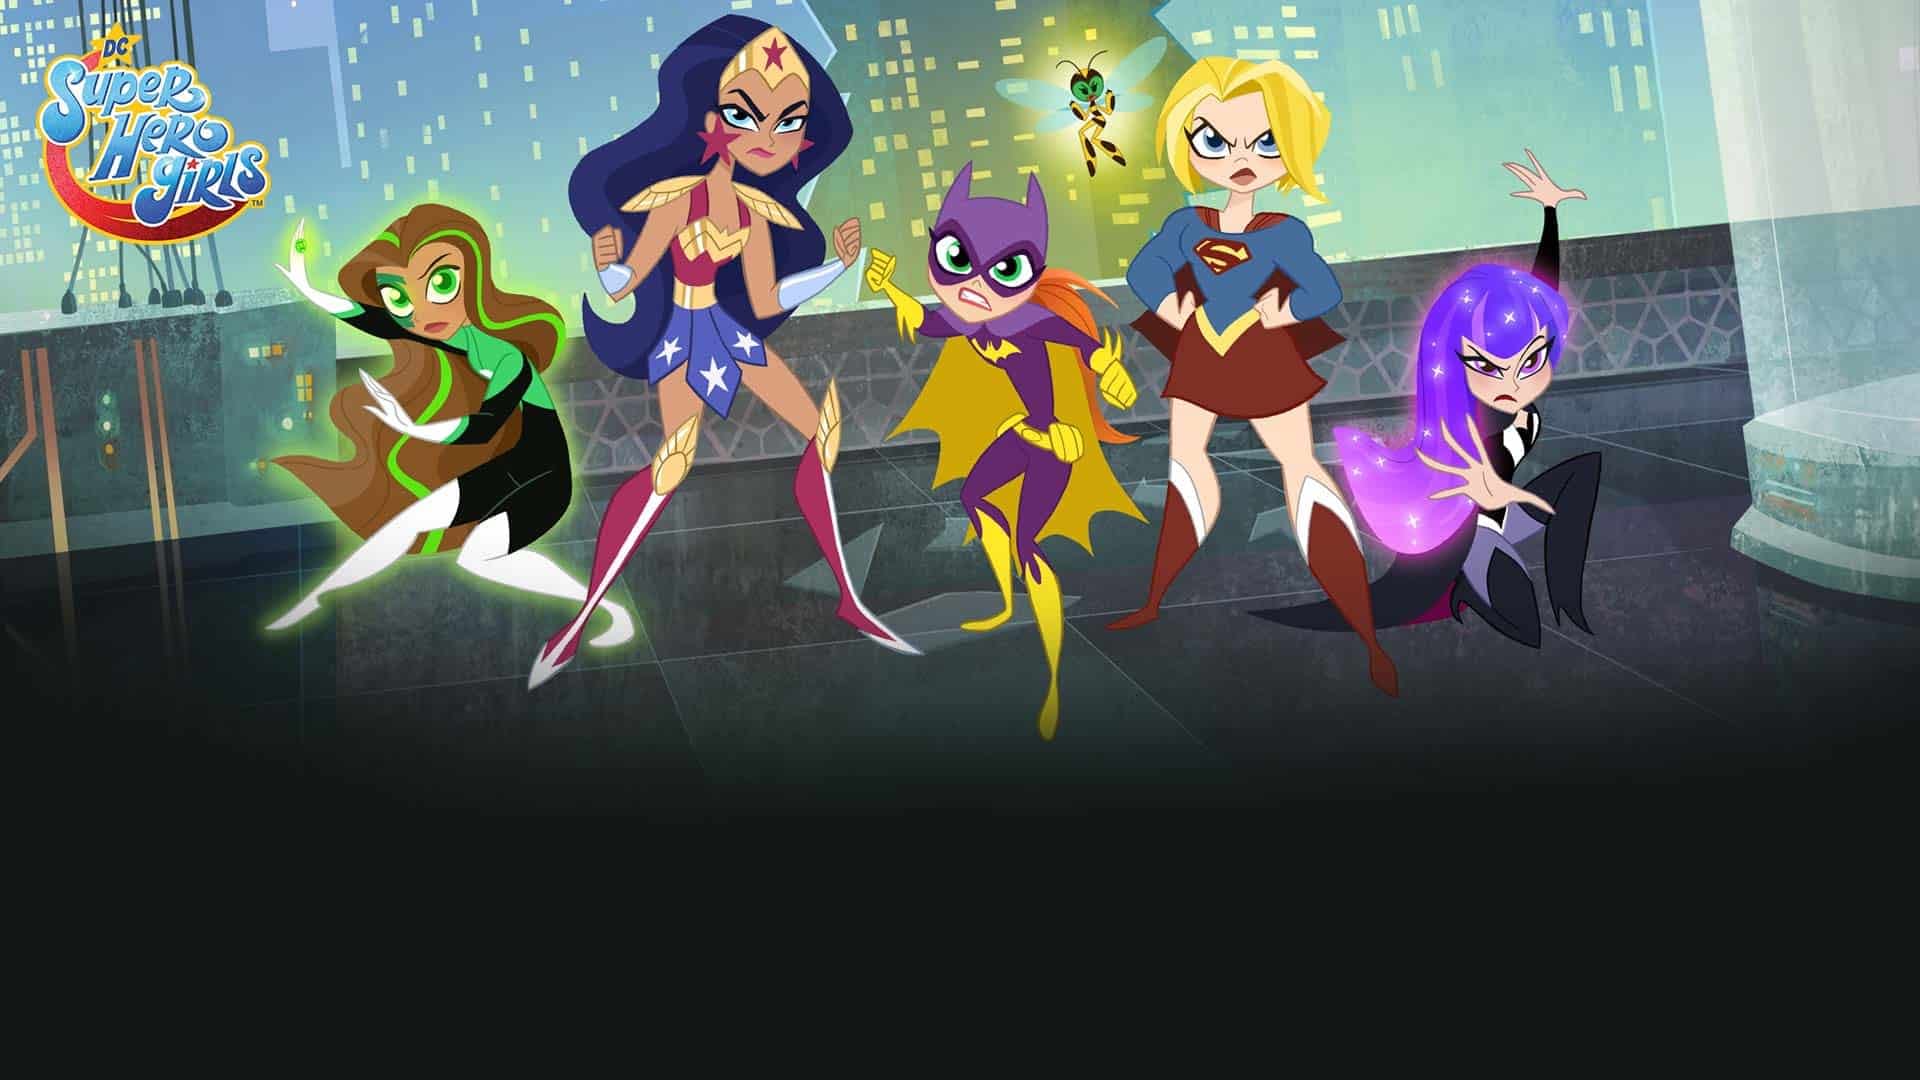 'DC Super Hero Girls': The Heroes We Need, The Heroes Int'l Women's Day Deserves [PREVIEW]